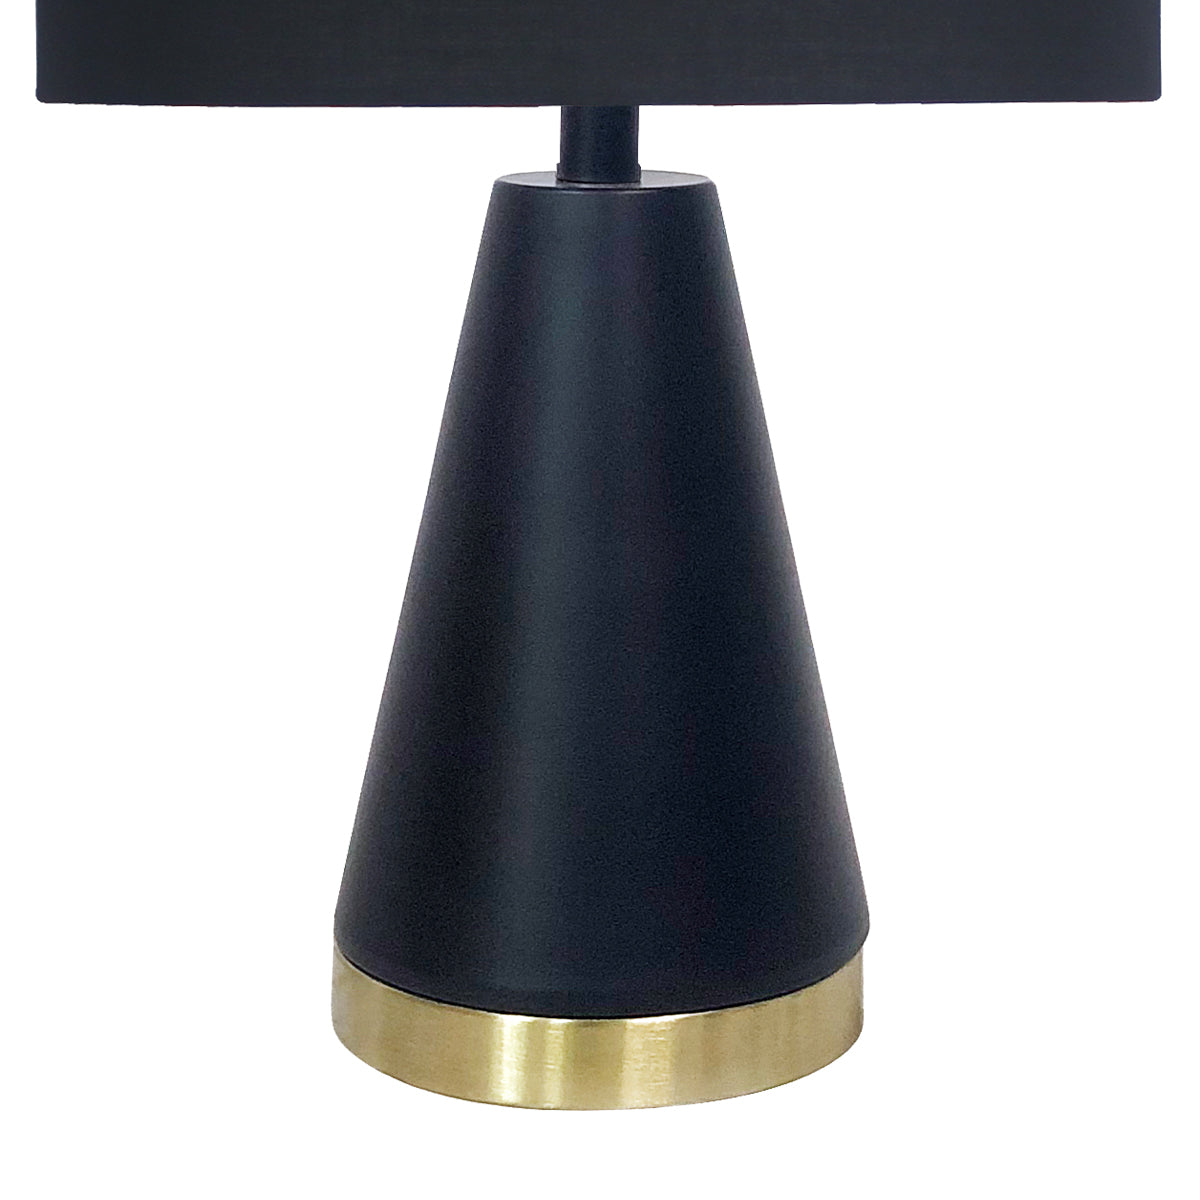 Sarantino Metal Table Lamp in Black and Gold - BM House & Garden